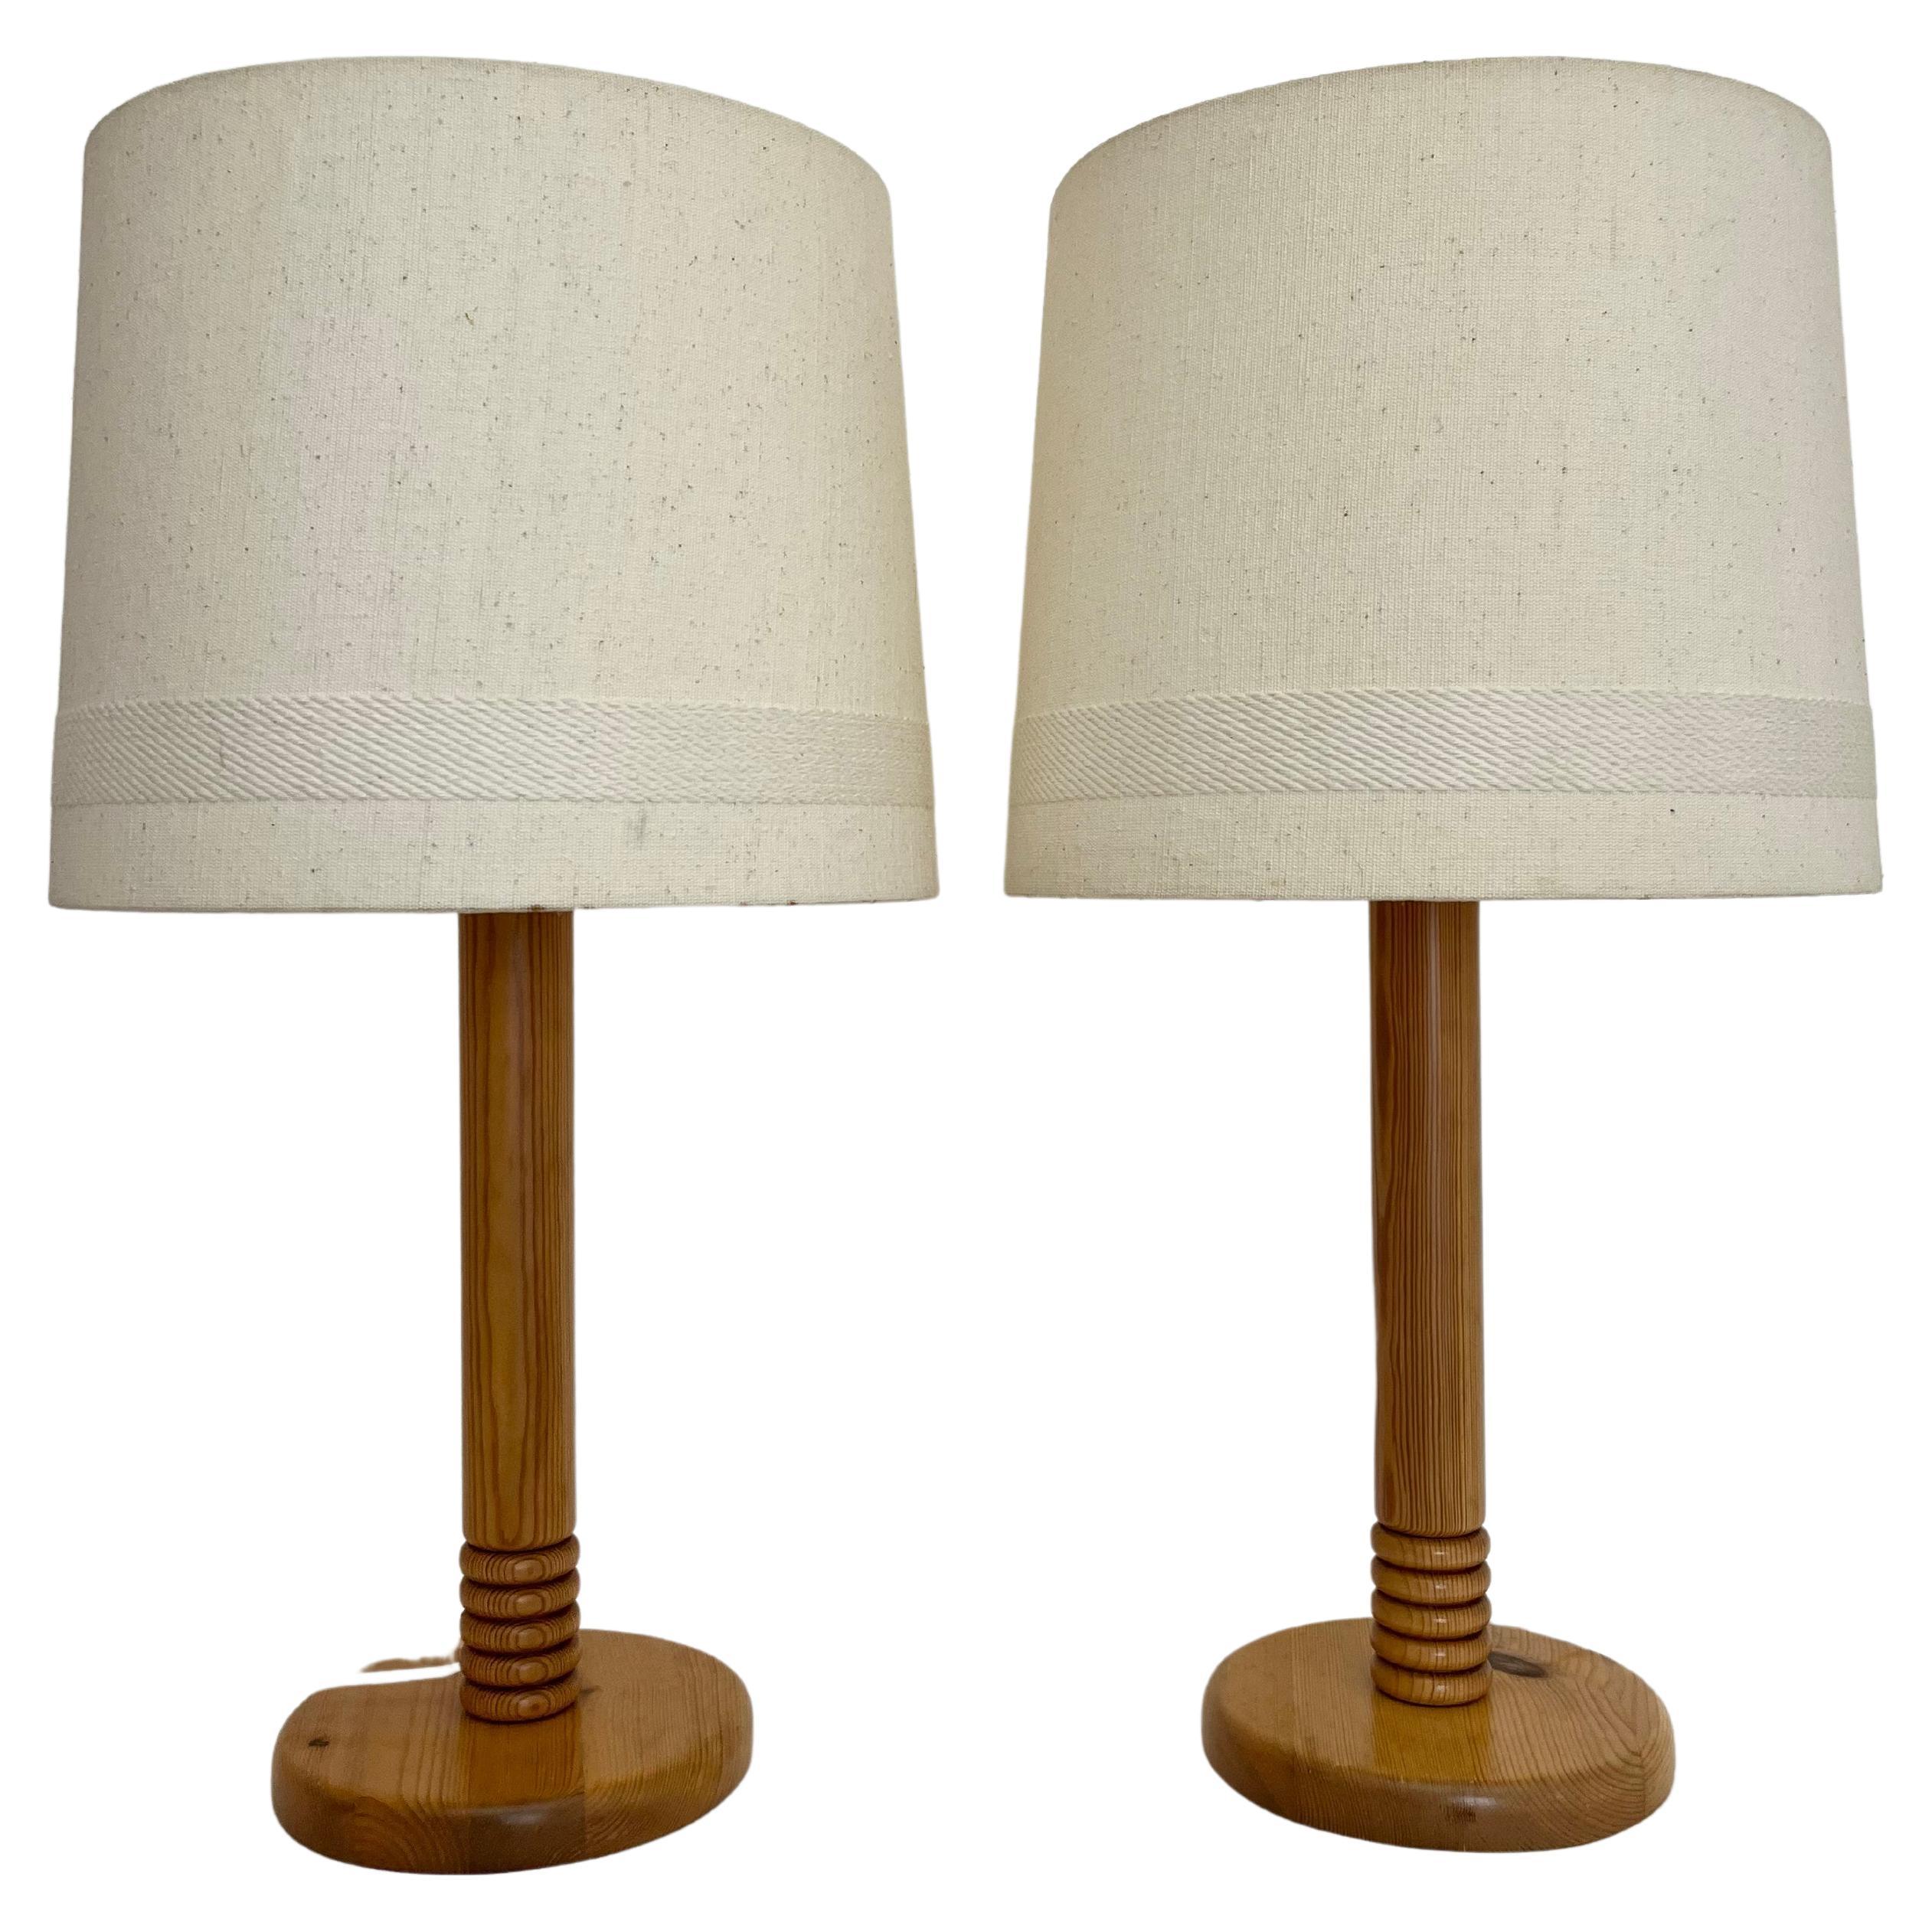 Pair of 1970s tall Danish wooden table lamps